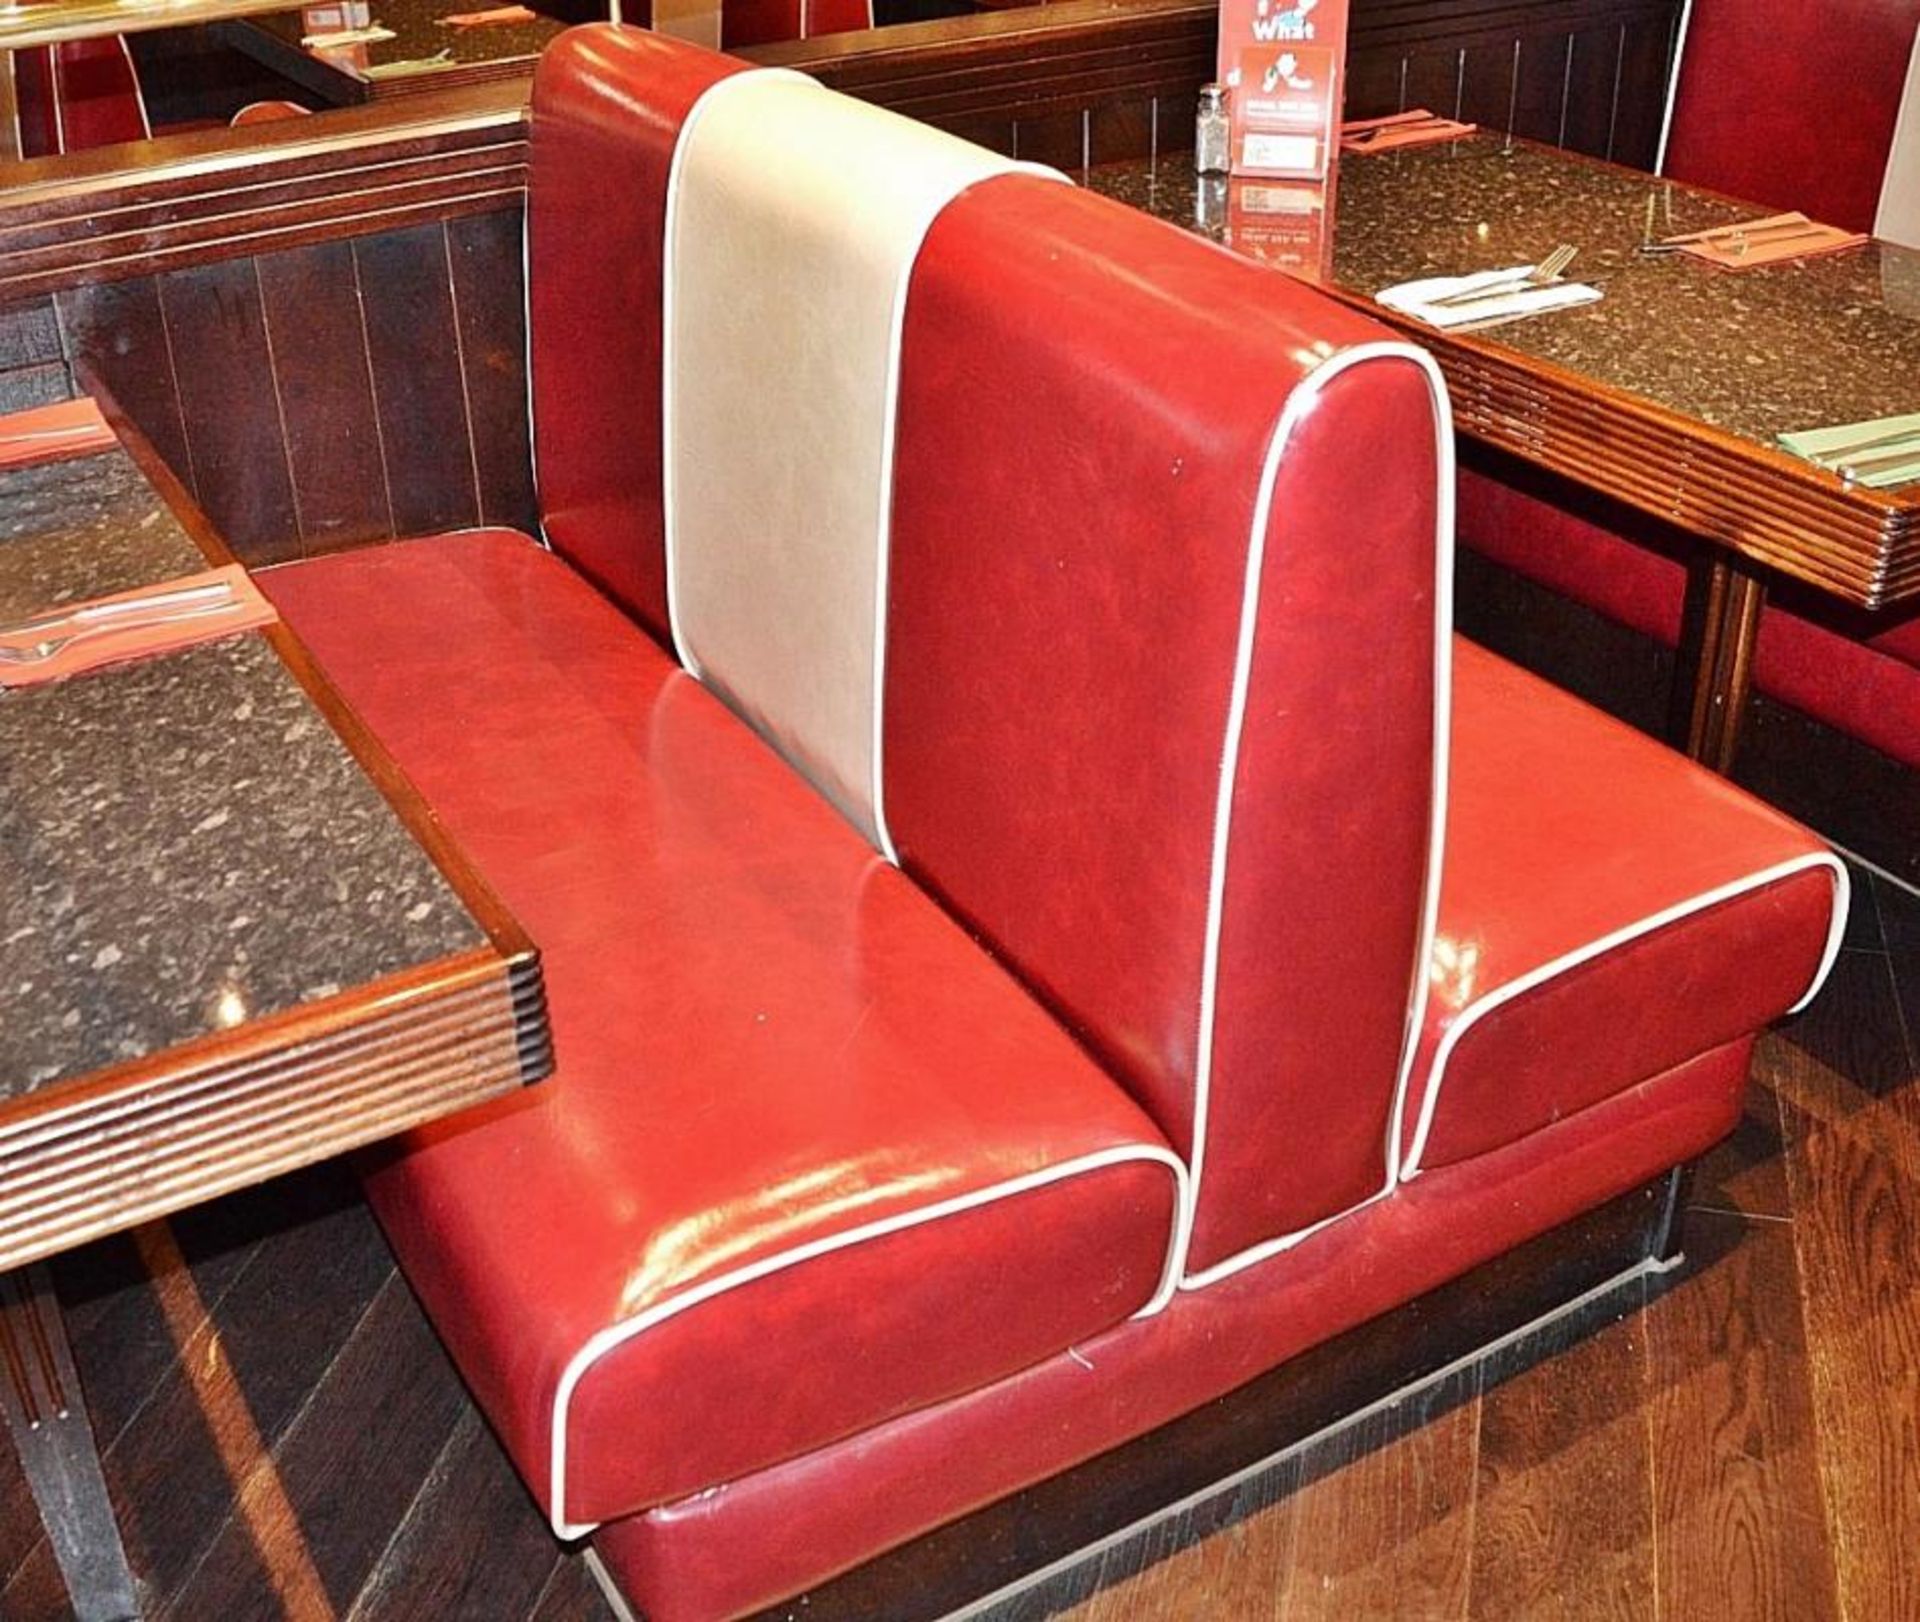 4 x Contemporary Double-Sided Booth Seating Benches - All Upholstered In A Bright Red Faux Leather - - Image 2 of 4